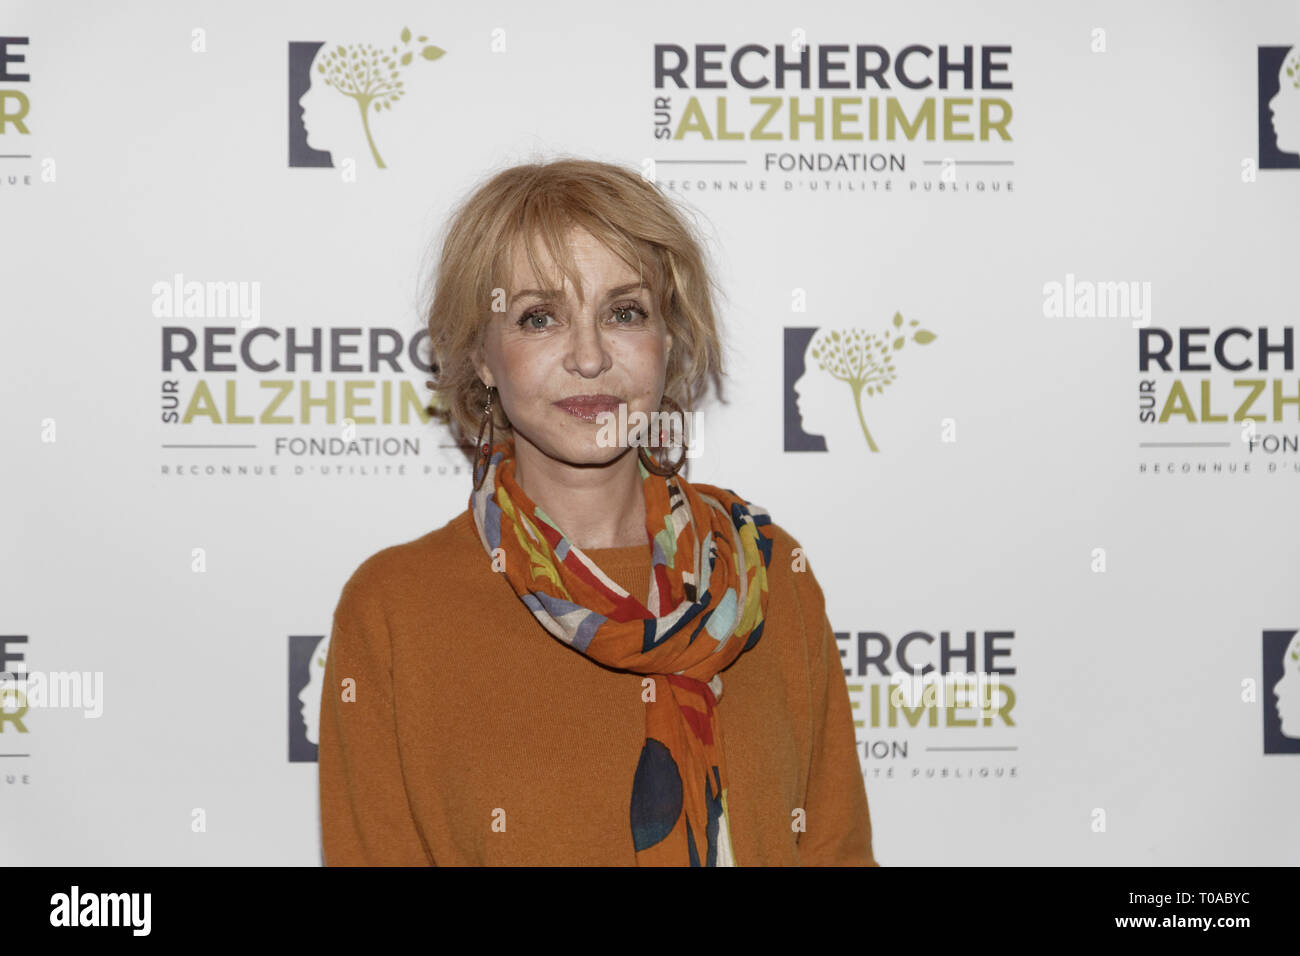 Paris, France. 18th Mar 2019. Fanny Cottençon - Photocall of the 14th Gala 2019 of the Association for Alzheimer Research at the Olympia in Paris on March 18, 2019 Credit: Véronique PHITOUSSI/Alamy Live News Stock Photo